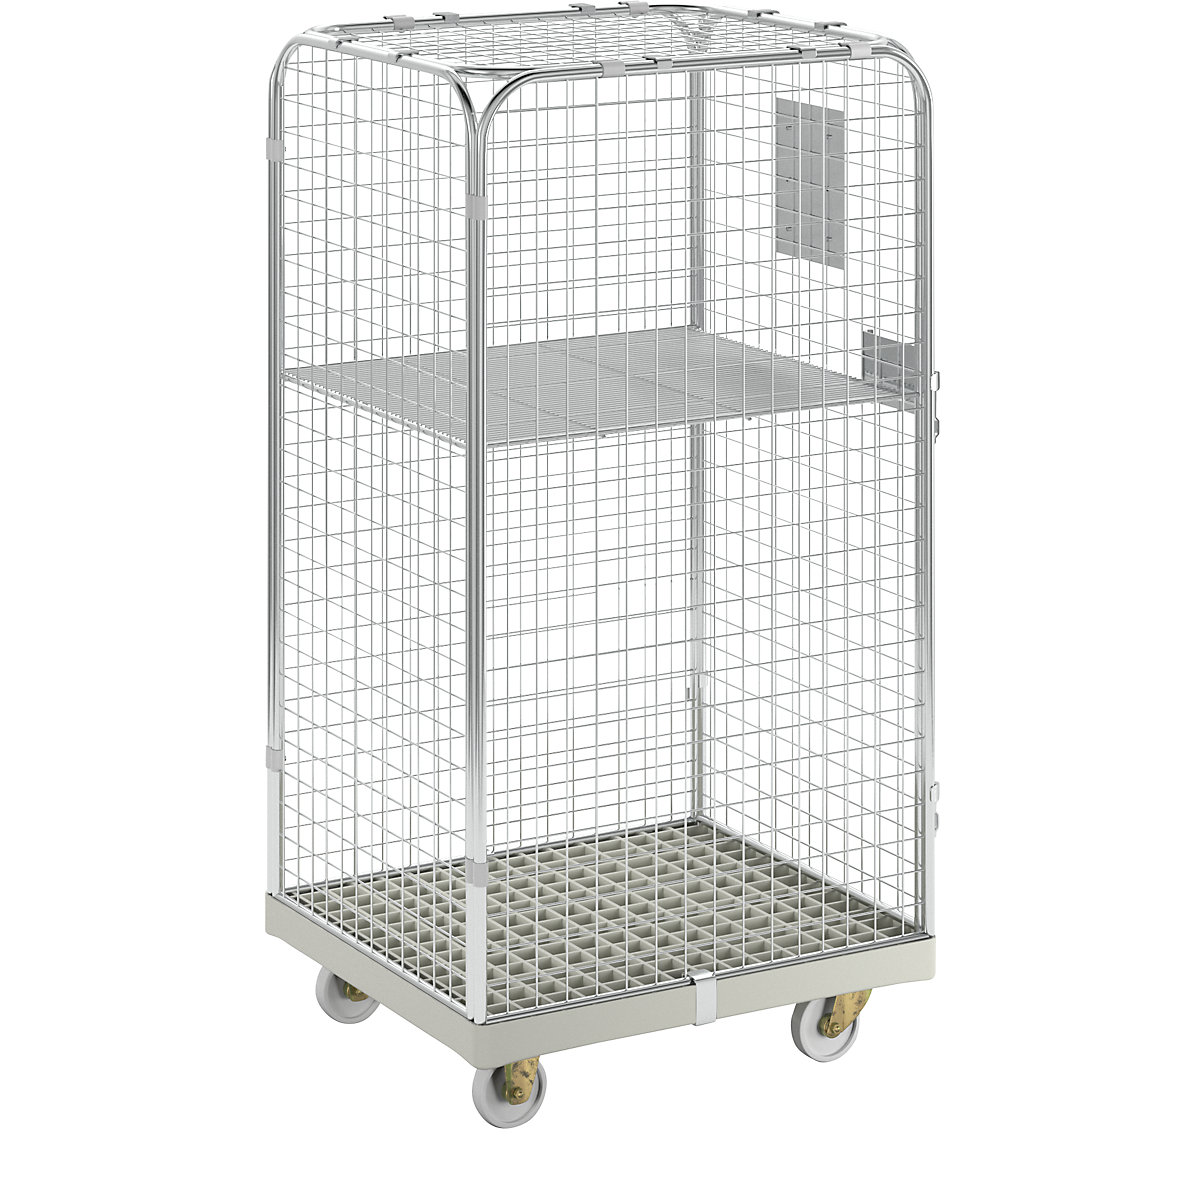 SAFE roll container, HxWxD 1550 x 720 x 810 mm, grey transport dolly-3